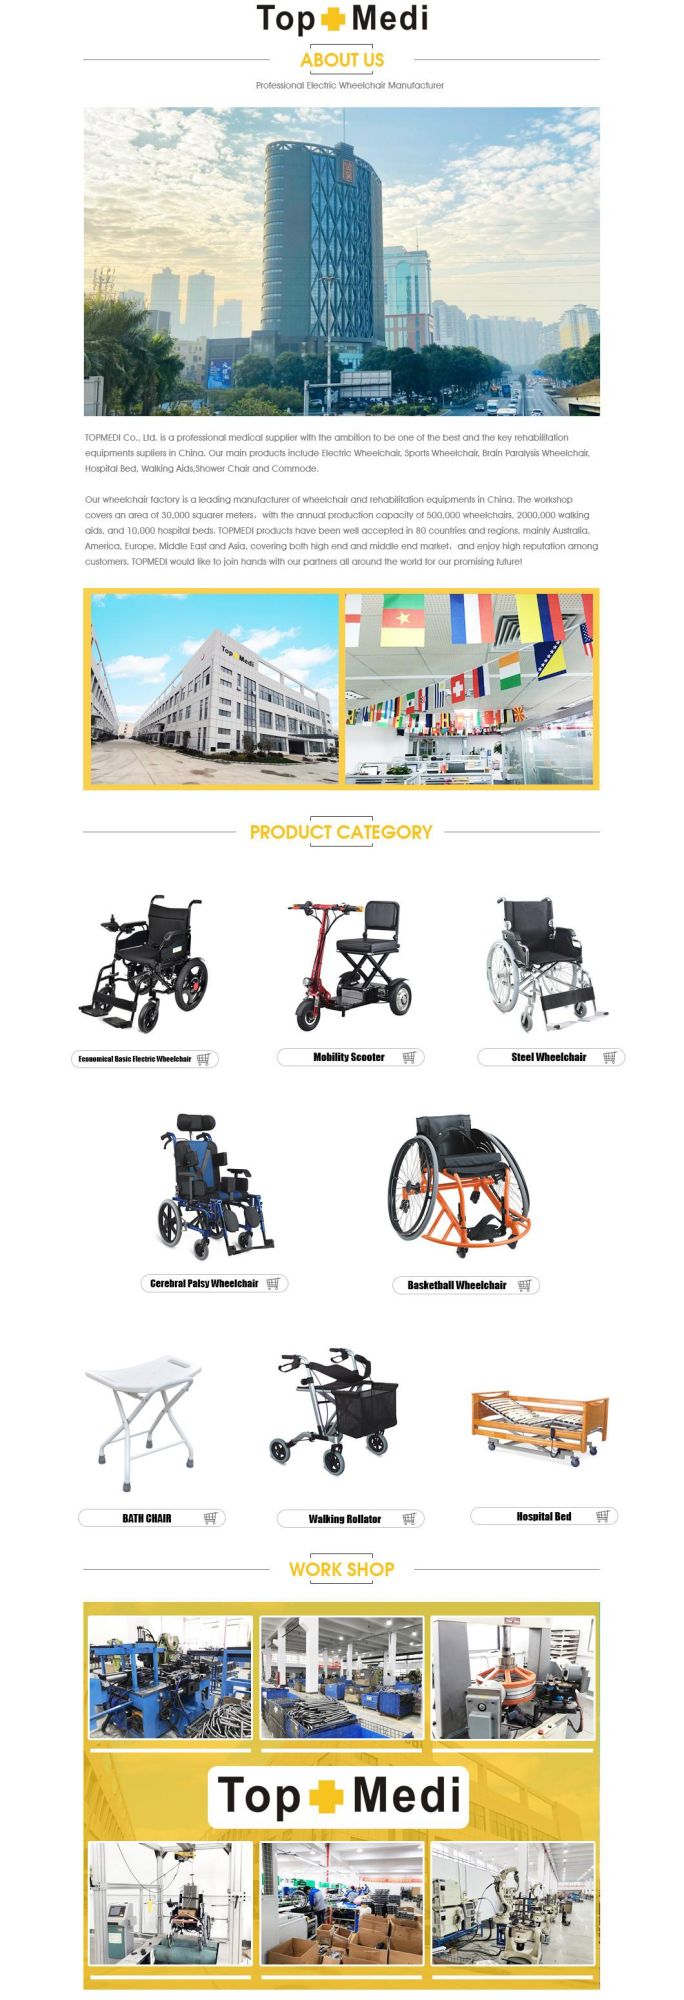 Cheap Price Good Quality Lightweight Aluminum Manual Wheelchair for Disabled People Price